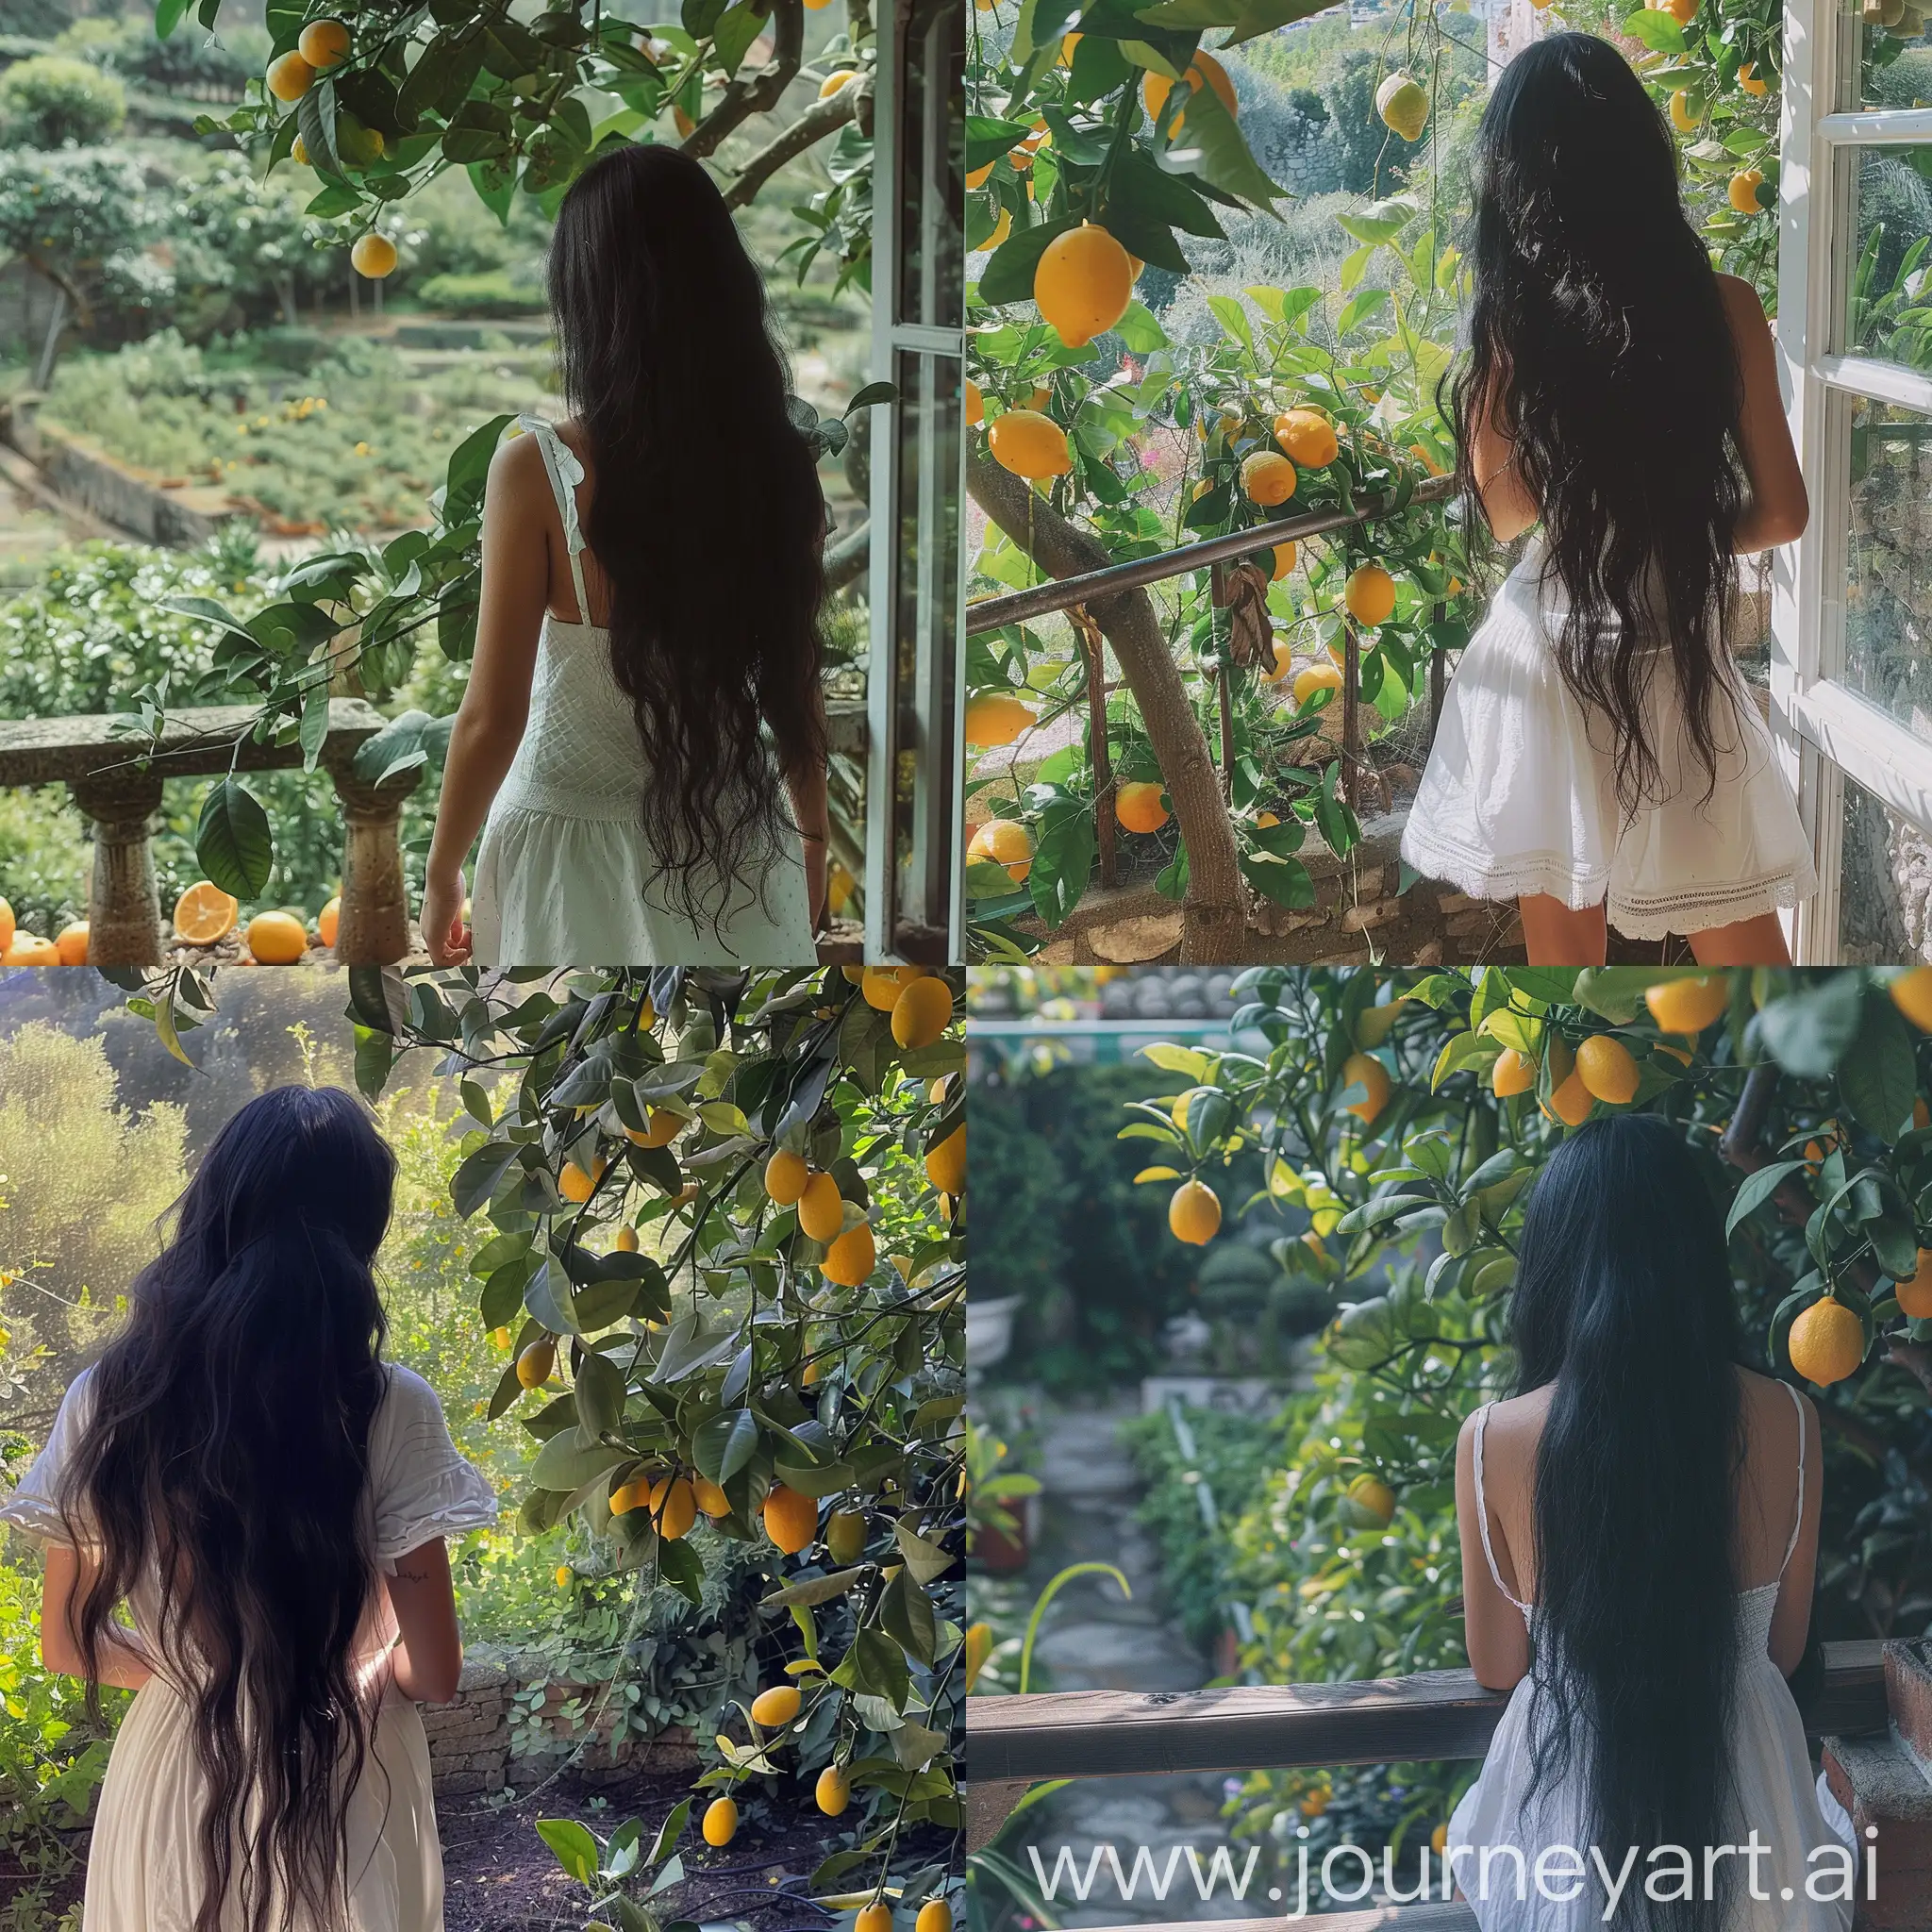 Aesthetic instagram picture real person, girl with long black hair in a white sun dress looking out at a garden next to a lemon tree